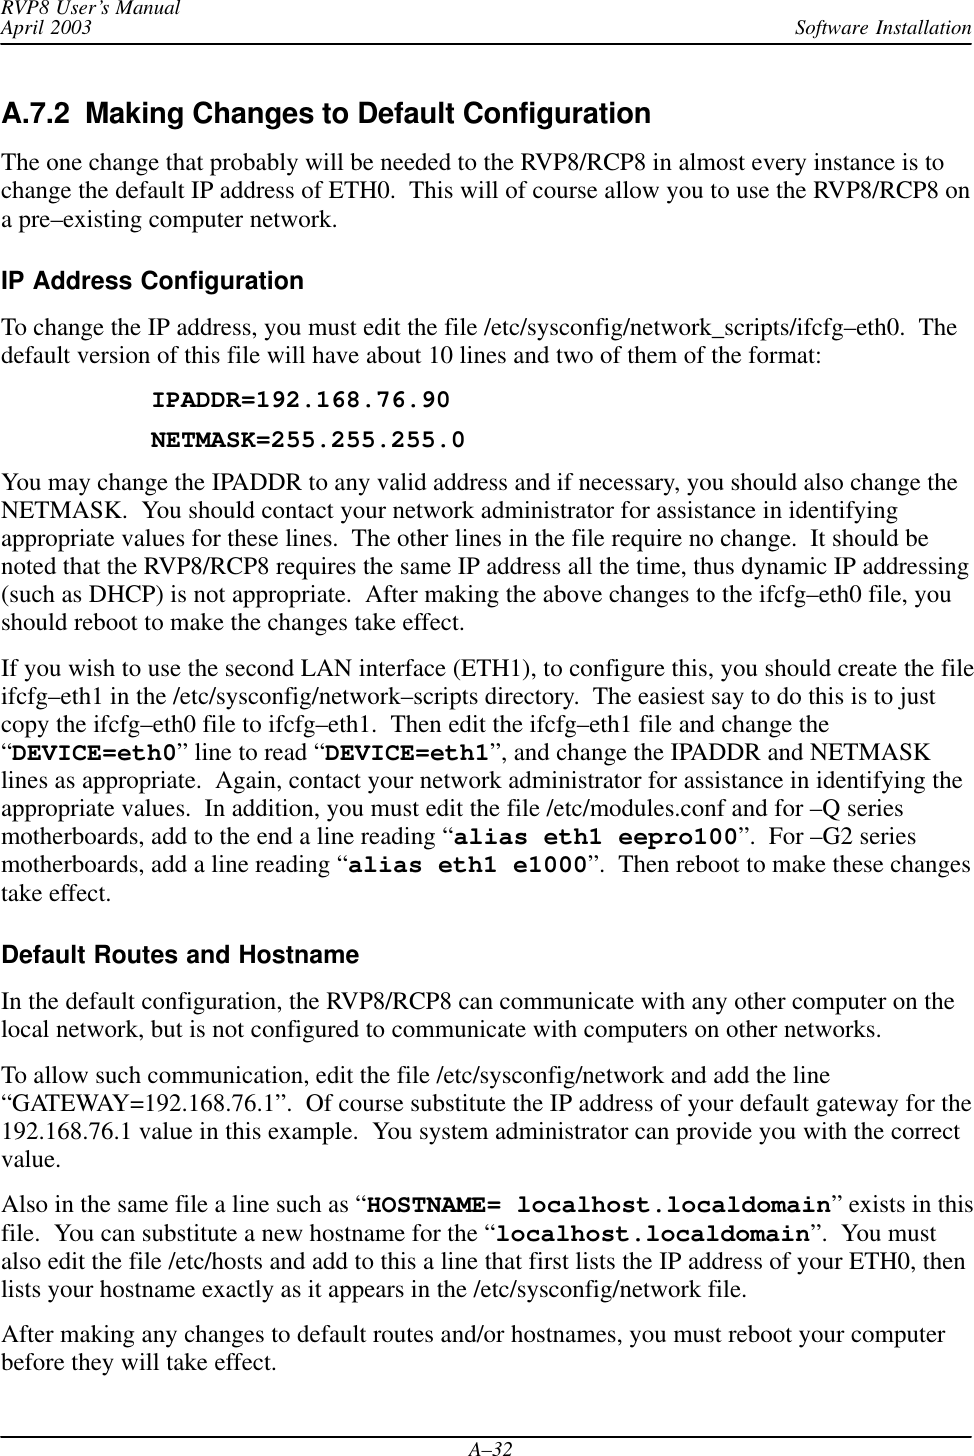 Software InstallationRVP8 User’s ManualApril 2003A–32A.7.2  Making Changes to Default ConfigurationThe one change that probably will be needed to the RVP8/RCP8 in almost every instance is tochange the default IP address of ETH0.  This will of course allow you to use the RVP8/RCP8 ona pre–existing computer network.IP Address ConfigurationTo change the IP address, you must edit the file /etc/sysconfig/network_scripts/ifcfg–eth0.  Thedefault version of this file will have about 10 lines and two of them of the format:IPADDR=192.168.76.90NETMASK=255.255.255.0You may change the IPADDR to any valid address and if necessary, you should also change theNETMASK.  You should contact your network administrator for assistance in identifyingappropriate values for these lines.  The other lines in the file require no change.  It should benoted that the RVP8/RCP8 requires the same IP address all the time, thus dynamic IP addressing(such as DHCP) is not appropriate.  After making the above changes to the ifcfg–eth0 file, youshould reboot to make the changes take effect.If you wish to use the second LAN interface (ETH1), to configure this, you should create the fileifcfg–eth1 in the /etc/sysconfig/network–scripts directory.  The easiest say to do this is to justcopy the ifcfg–eth0 file to ifcfg–eth1.  Then edit the ifcfg–eth1 file and change the“DEVICE=eth0” line to read “DEVICE=eth1”, and change the IPADDR and NETMASKlines as appropriate.  Again, contact your network administrator for assistance in identifying theappropriate values.  In addition, you must edit the file /etc/modules.conf and for –Q seriesmotherboards, add to the end a line reading “alias eth1 eepro100”.  For –G2 seriesmotherboards, add a line reading “alias eth1 e1000”.  Then reboot to make these changestake effect.Default Routes and HostnameIn the default configuration, the RVP8/RCP8 can communicate with any other computer on thelocal network, but is not configured to communicate with computers on other networks.To allow such communication, edit the file /etc/sysconfig/network and add the line“GATEWAY=192.168.76.1”.  Of course substitute the IP address of your default gateway for the192.168.76.1 value in this example.  You system administrator can provide you with the correctvalue.Also in the same file a line such as “HOSTNAME= localhost.localdomain” exists in thisfile.  You can substitute a new hostname for the “localhost.localdomain”.  You mustalso edit the file /etc/hosts and add to this a line that first lists the IP address of your ETH0, thenlists your hostname exactly as it appears in the /etc/sysconfig/network file.After making any changes to default routes and/or hostnames, you must reboot your computerbefore they will take effect.